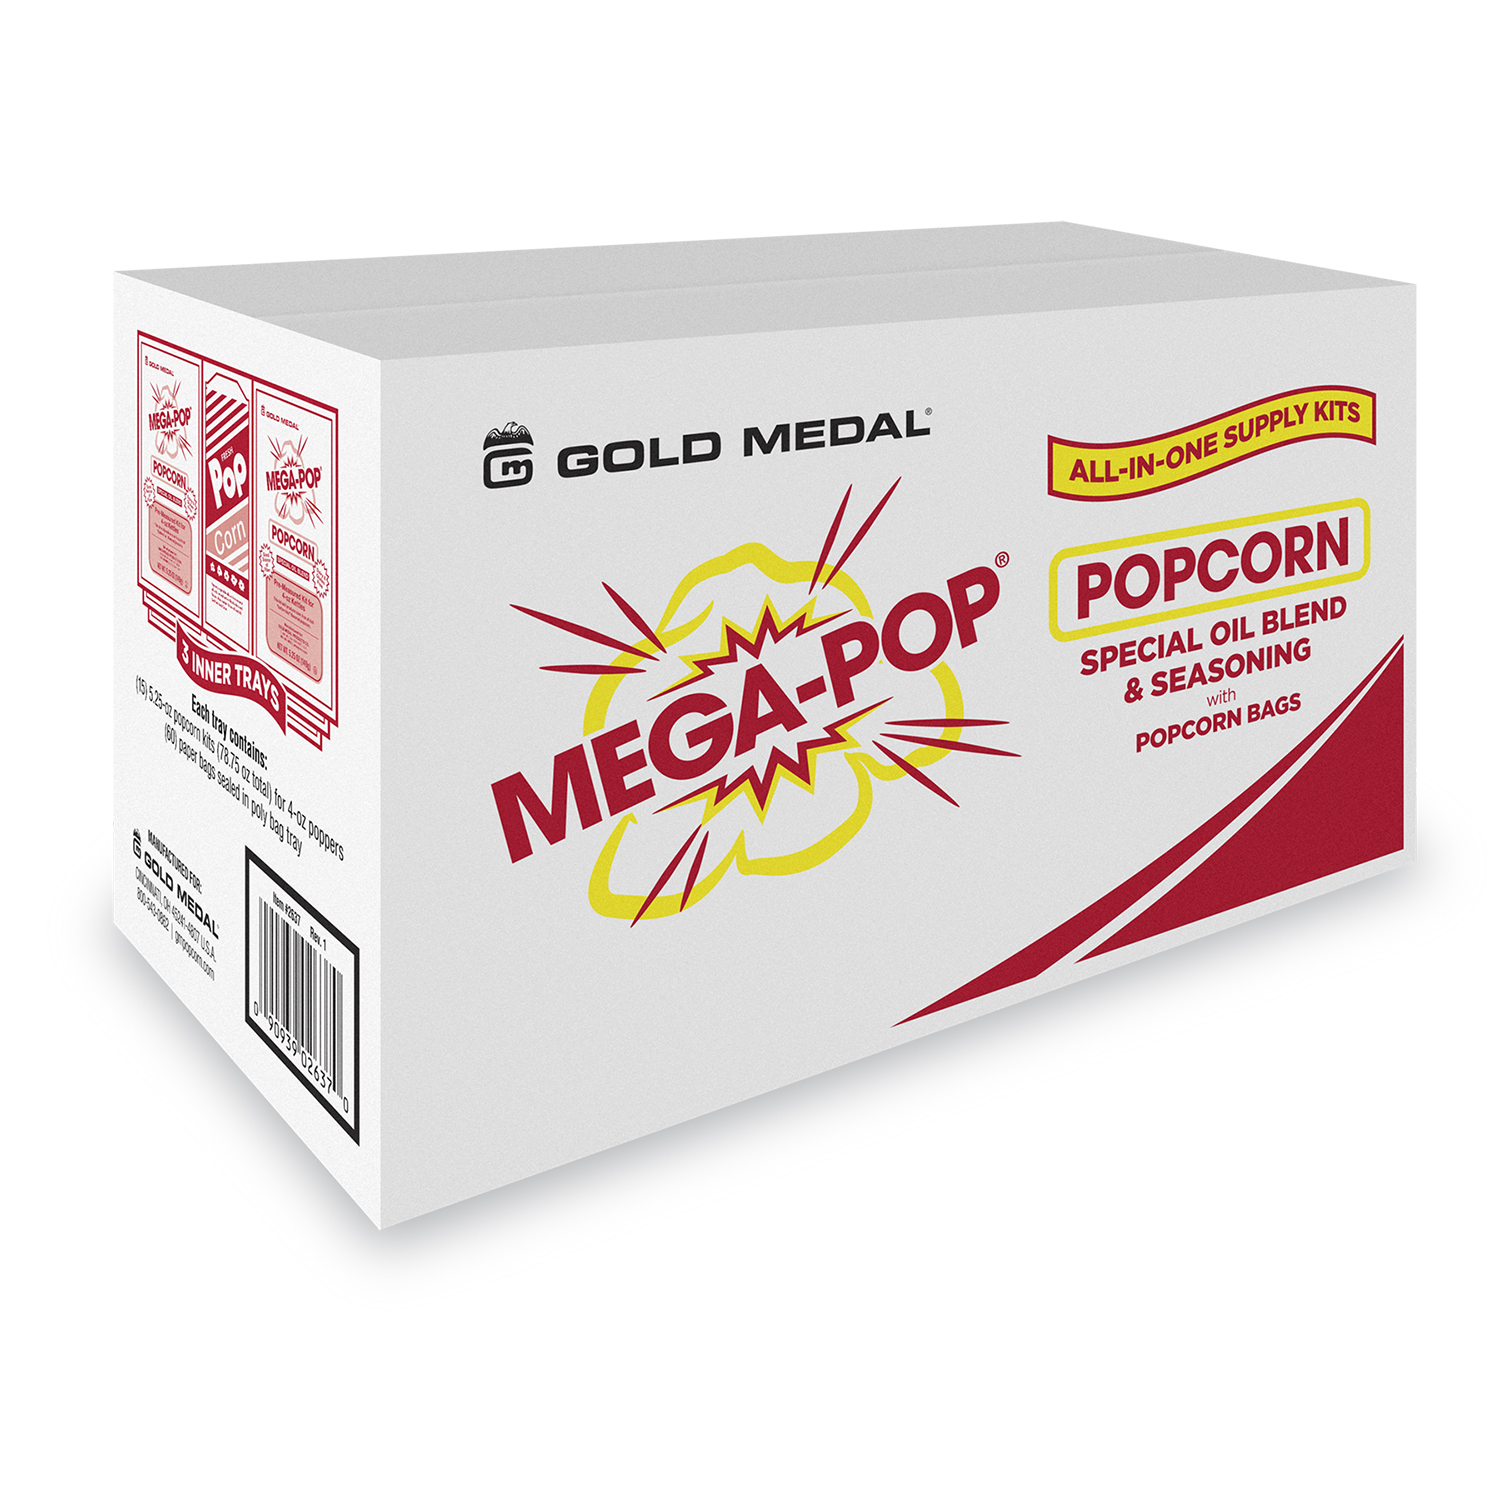 https://www.thepopcornmachine.com/image/data/gold_medal_products_co/2637megapop-outer%20case.jpg